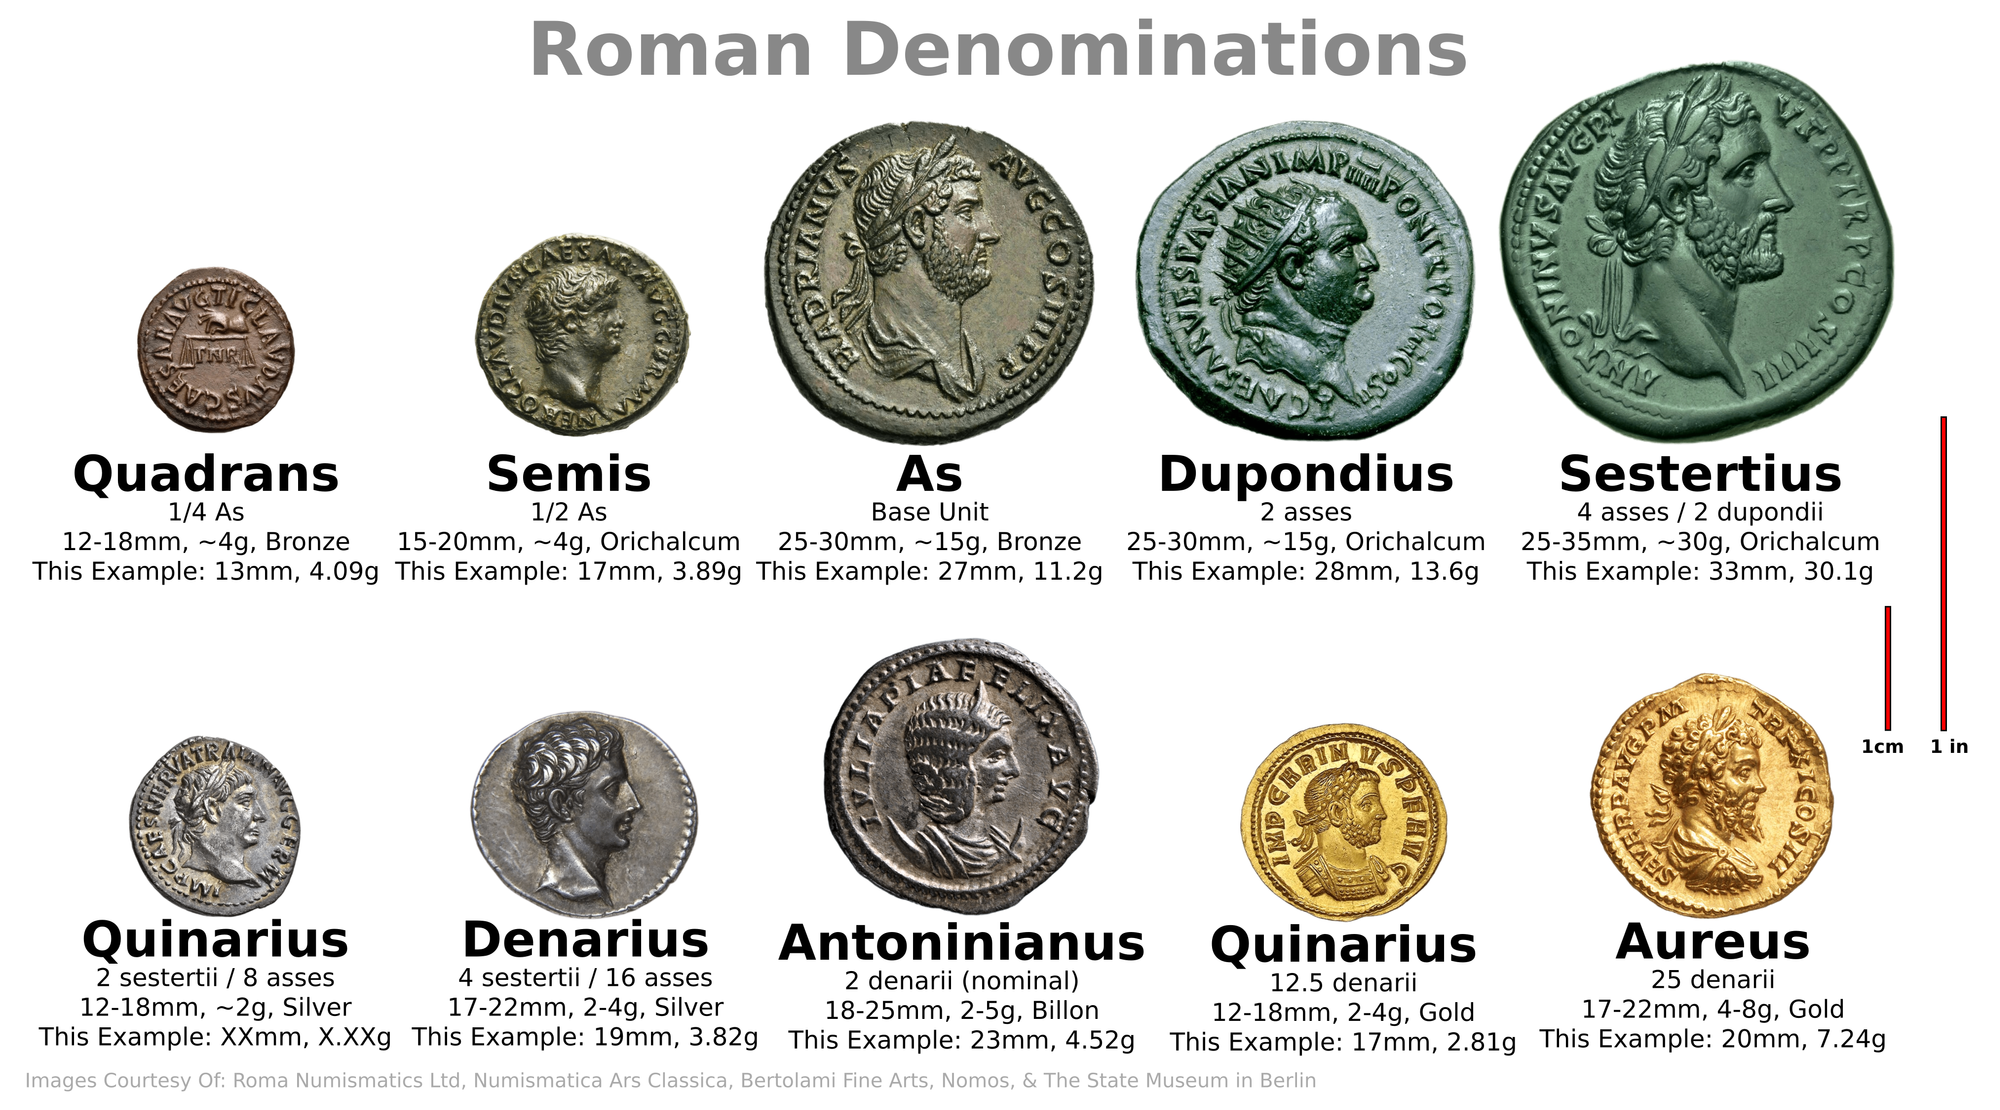 The most common denominations used during Early Roman times, their relative sizes, and relative values